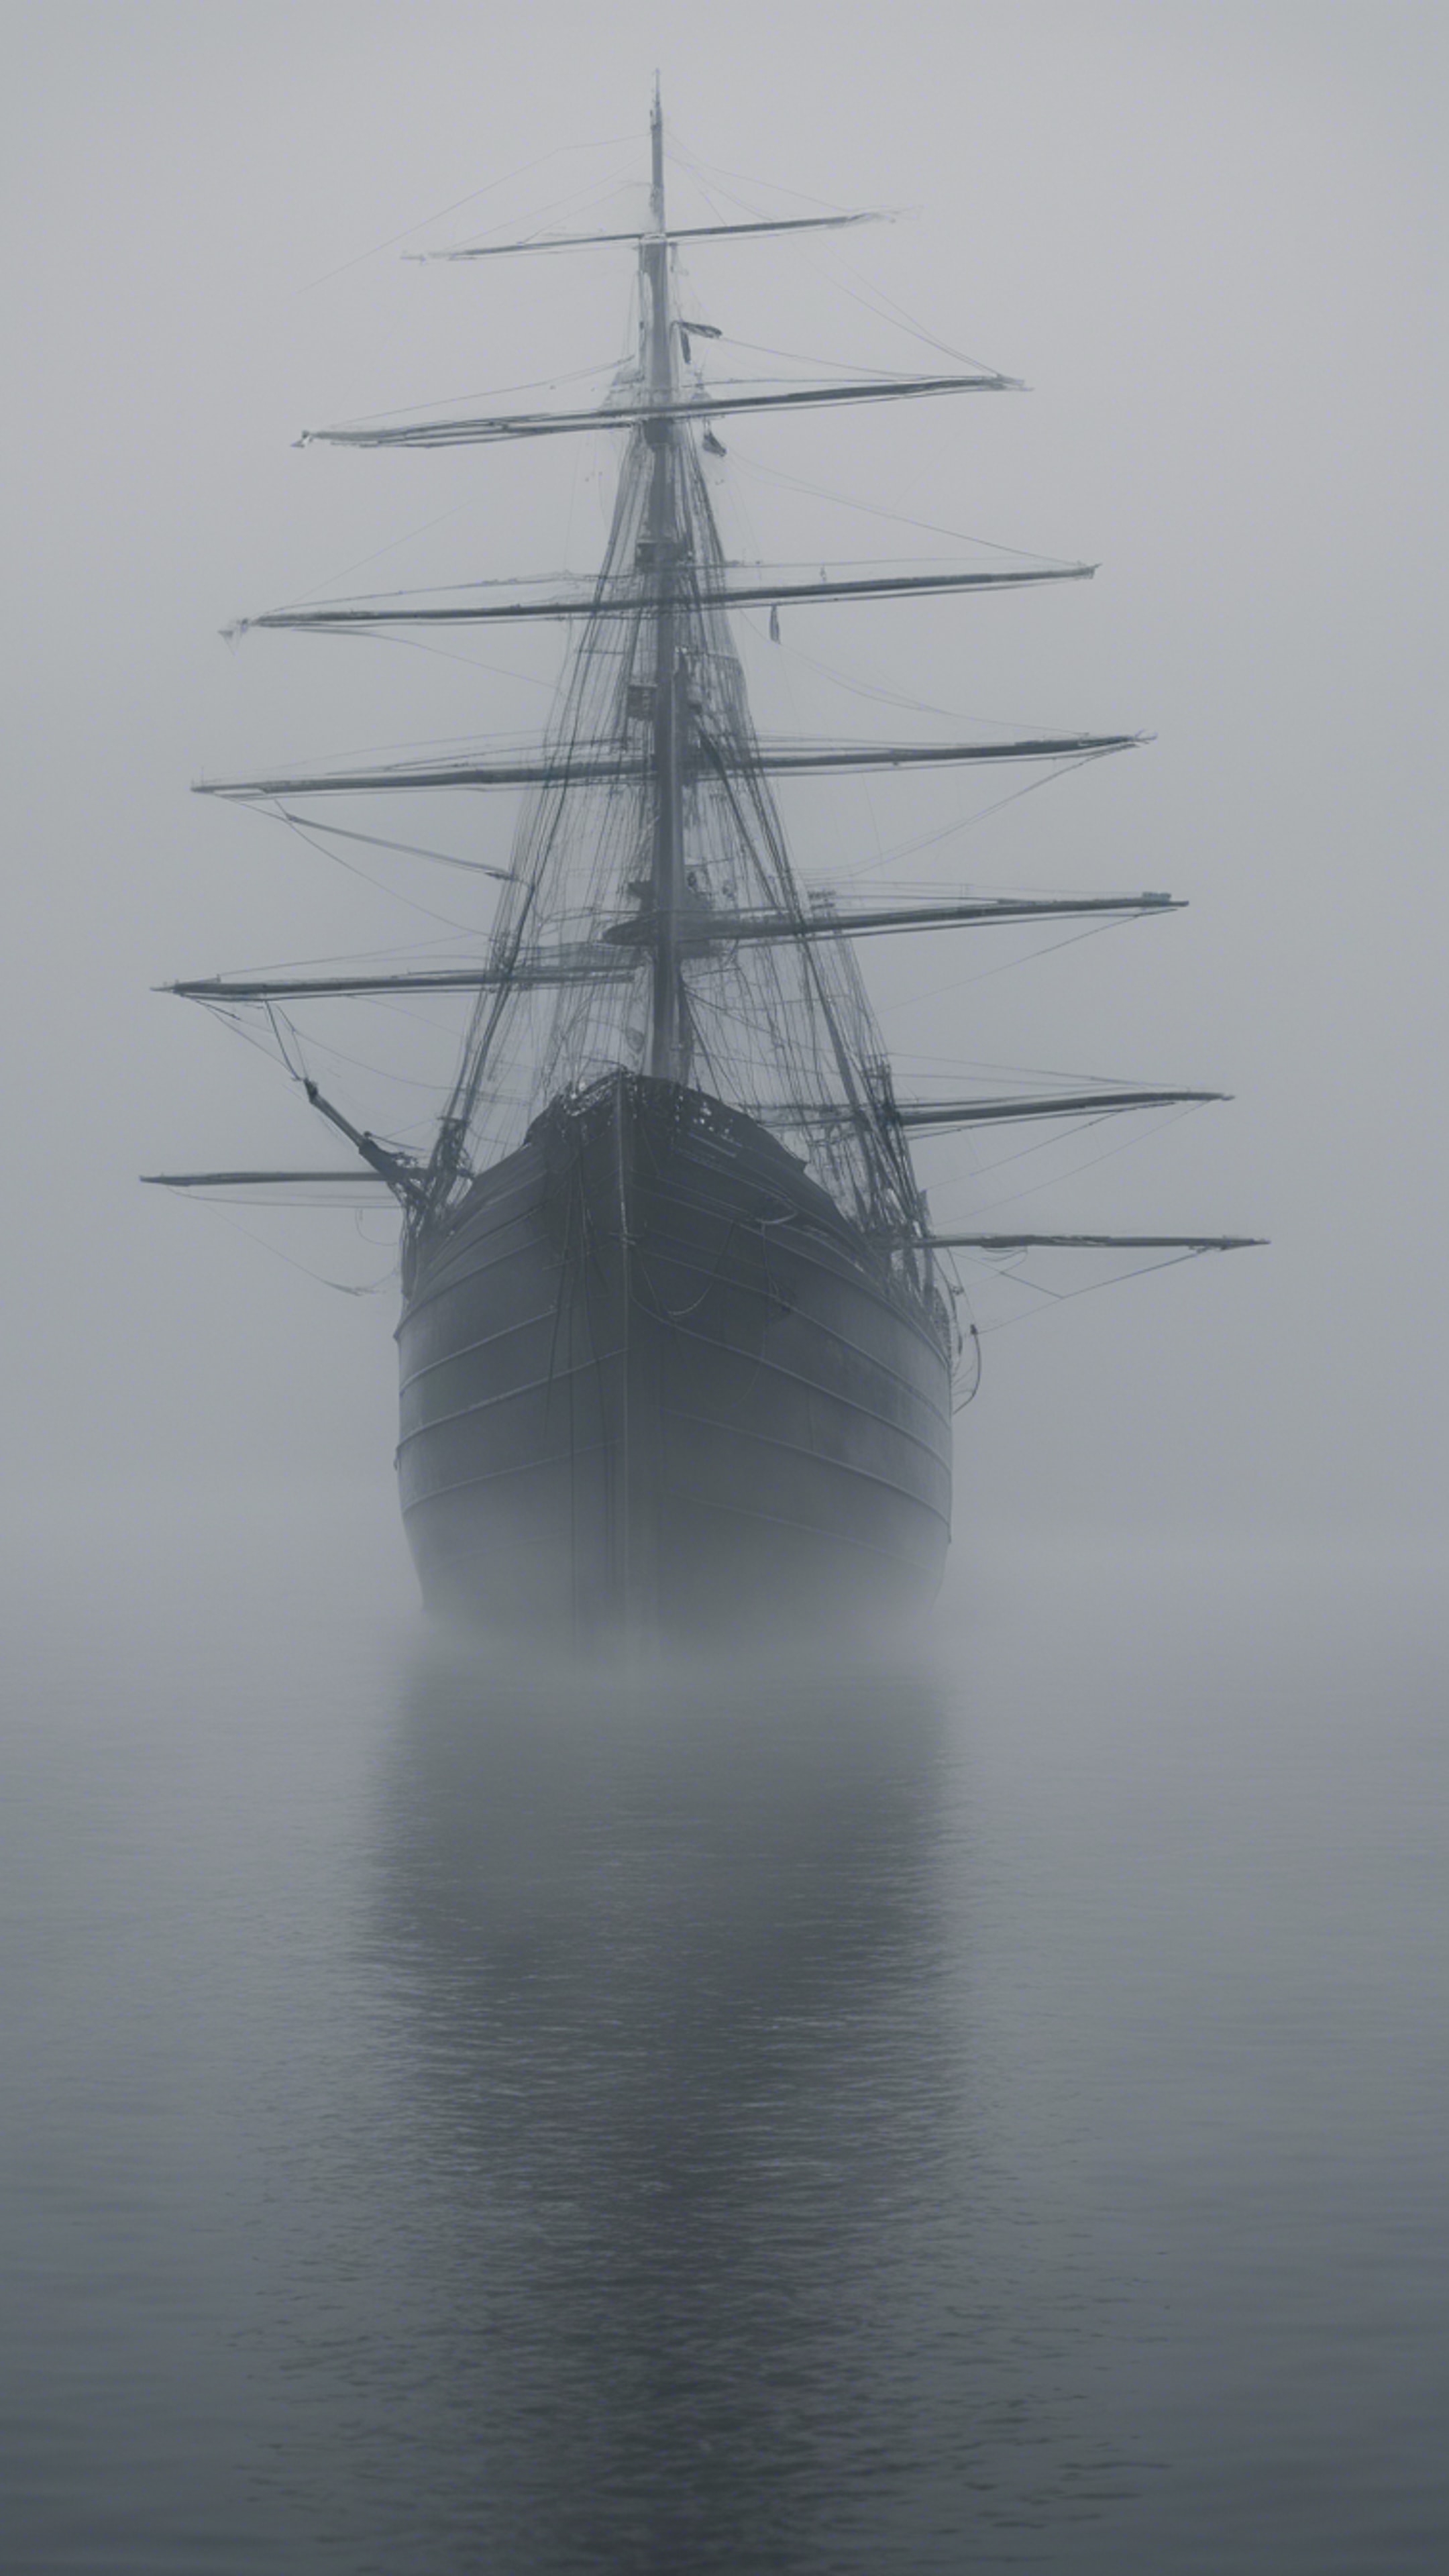 A ghost ship sailing through heavy fog, its masts obscured in drifting grey smoke. Tapeet[277c5cc3bc0e4445b824]